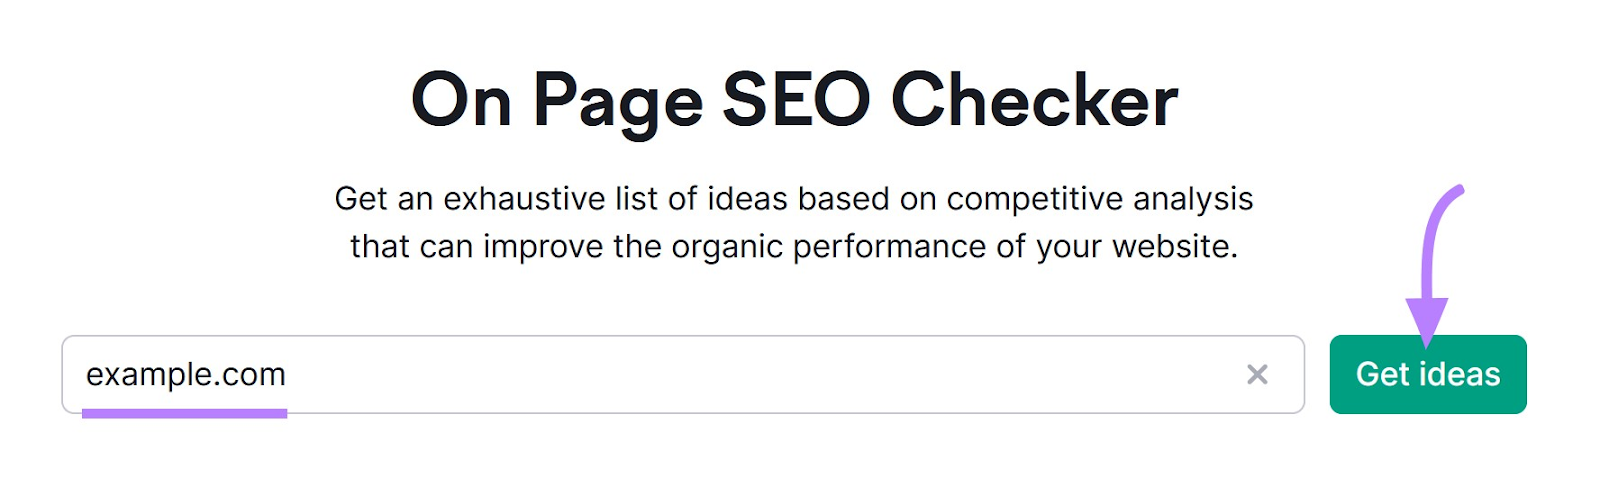 Get ideas with On Page SEO Checker tool